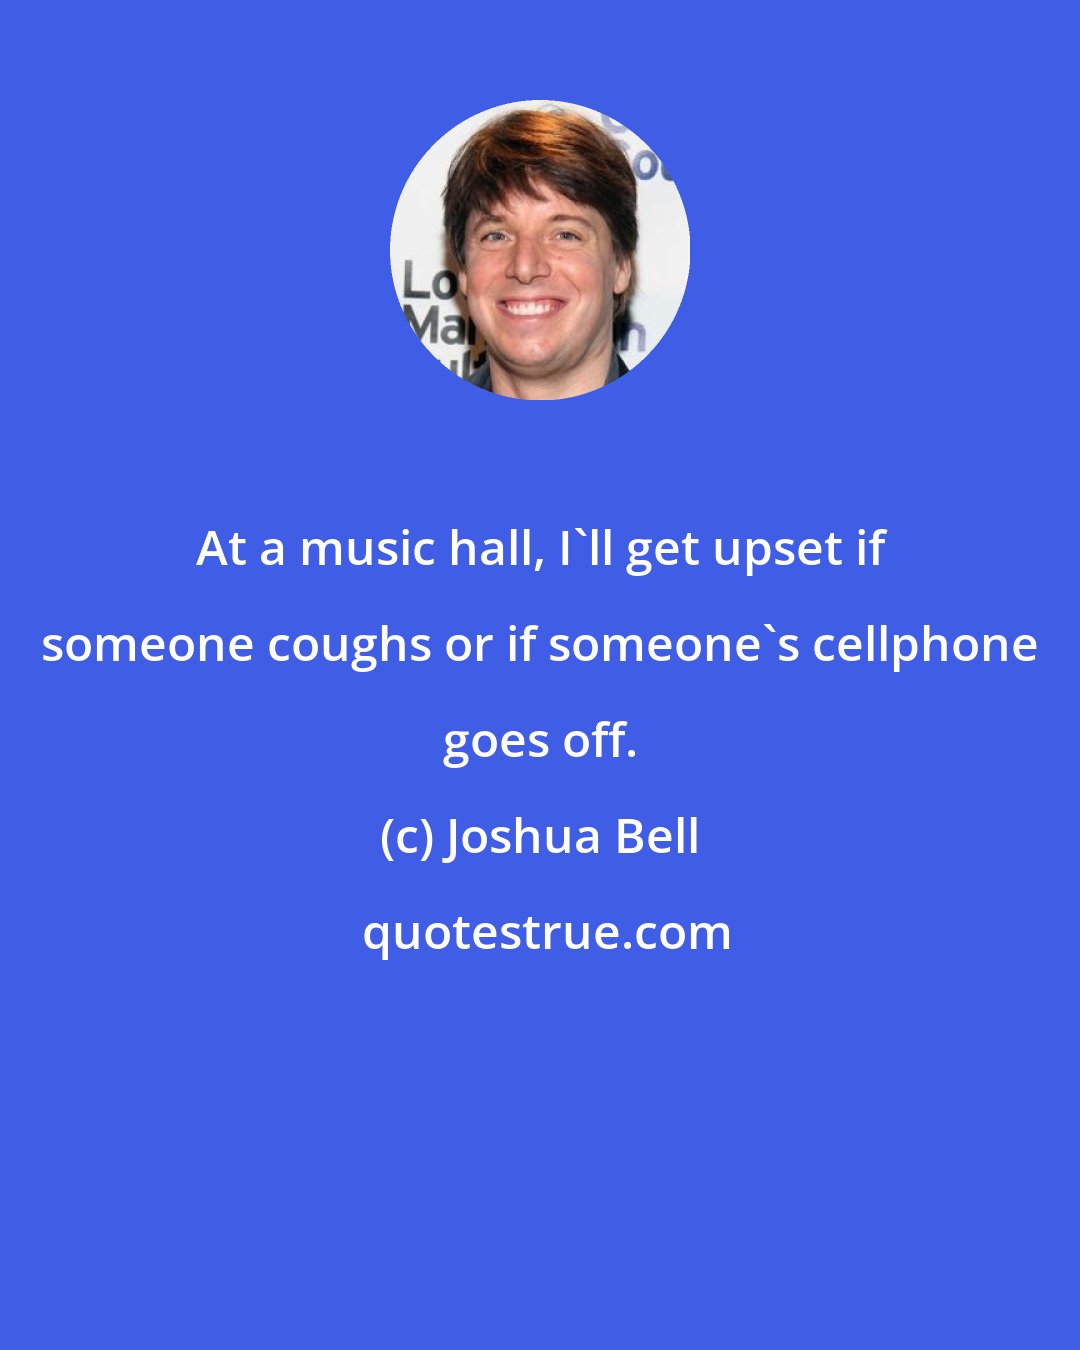 Joshua Bell: At a music hall, I'll get upset if someone coughs or if someone's cellphone goes off.